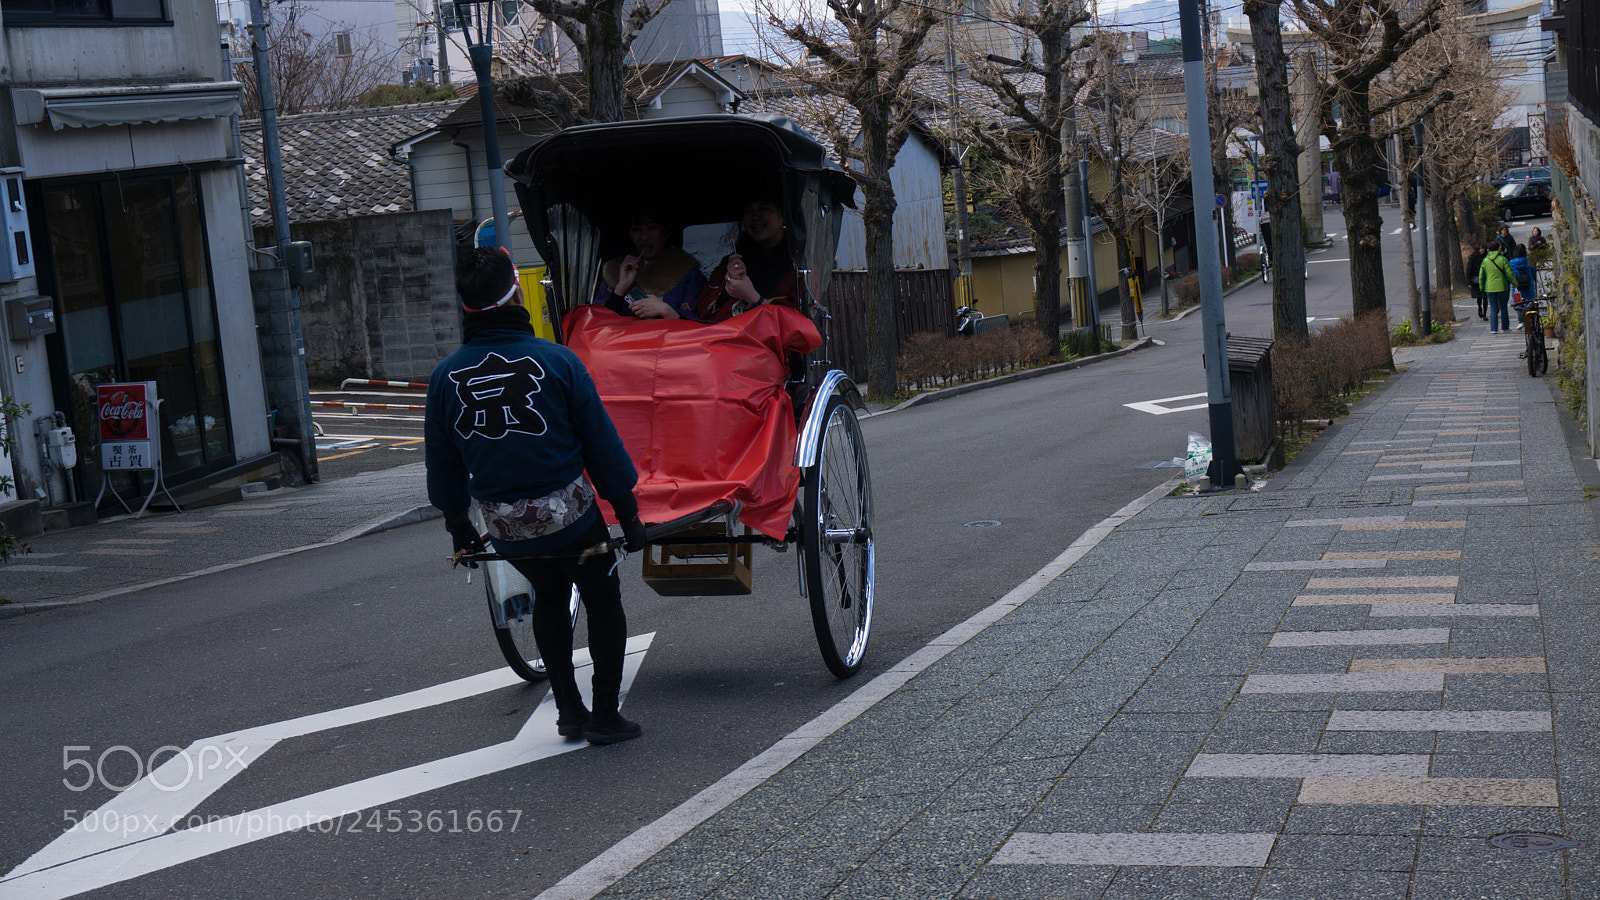 Sony a6000 sample photo. Rickshaw in road photography